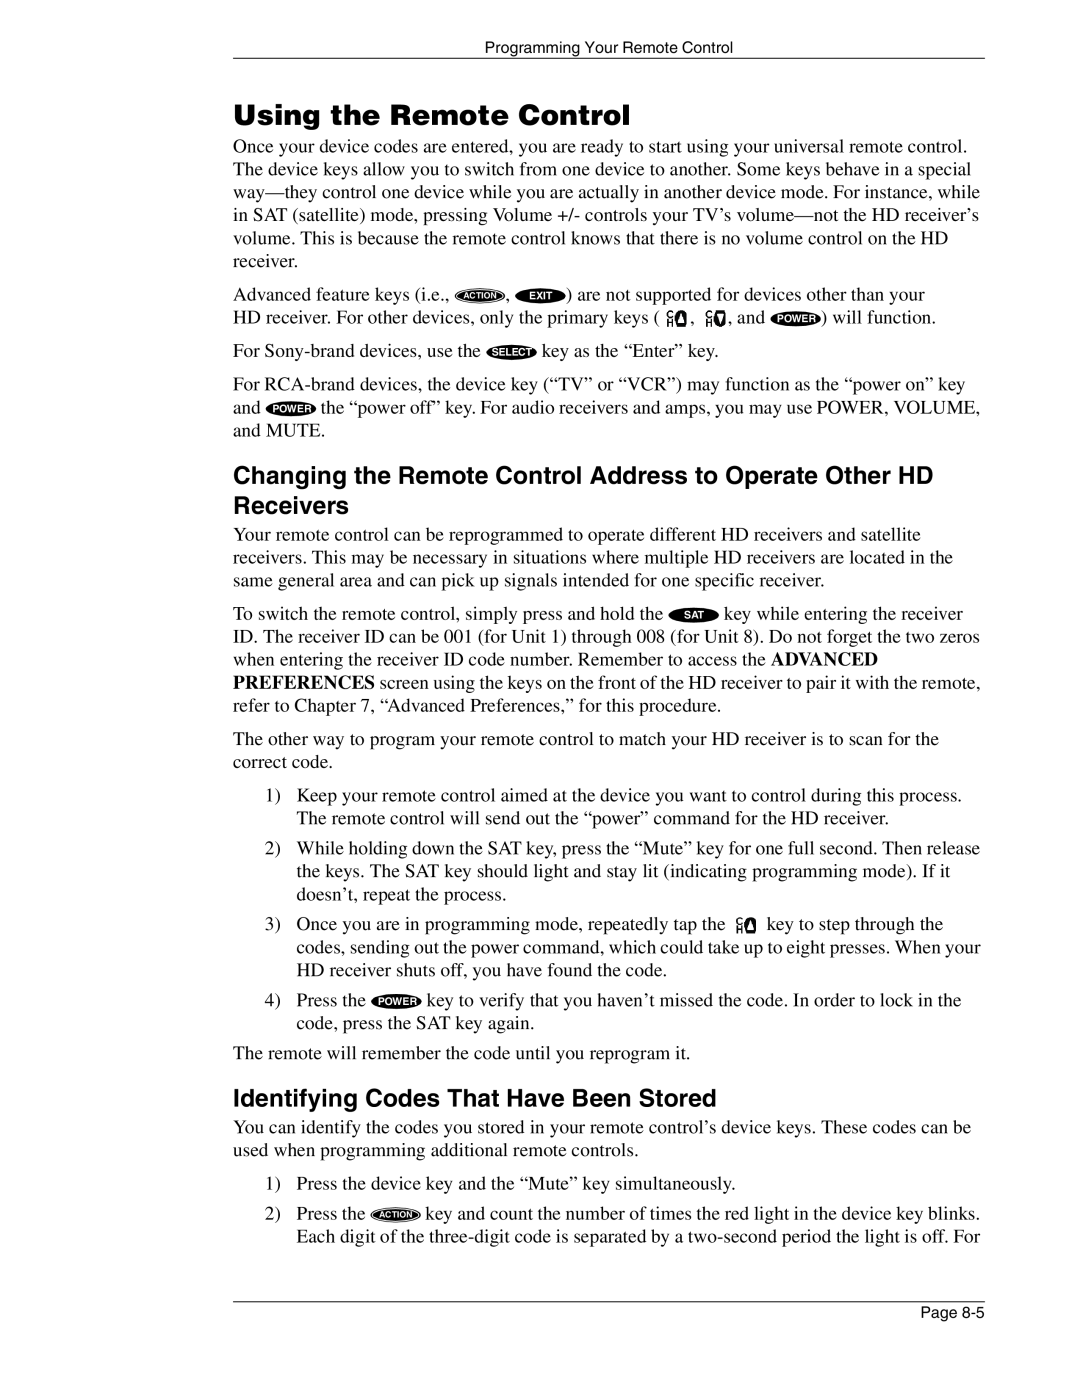 DirecTV HIRD-E86 manual Using the Remote Control, Identifying Codes That Have Been Stored 